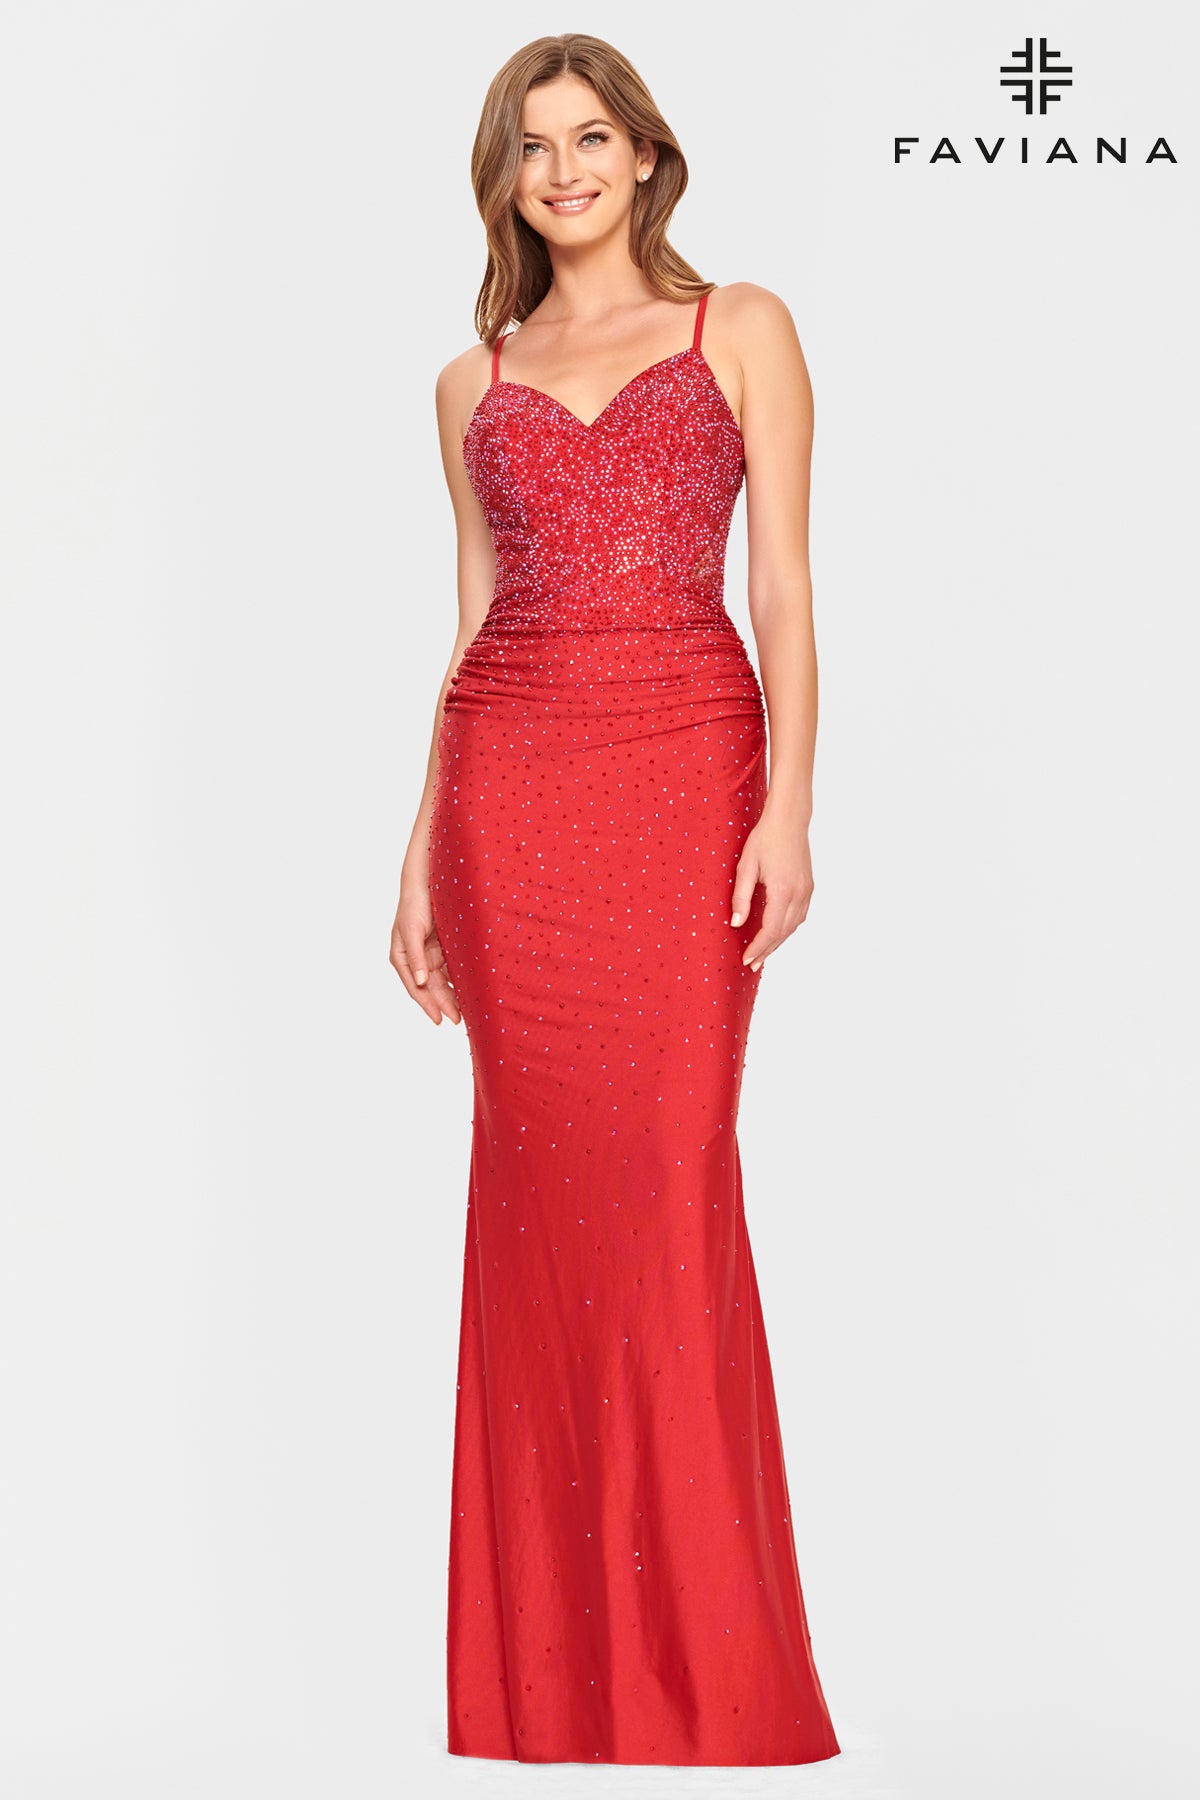 Red V Neck Dress With Corset Back And Rhinestone Beading